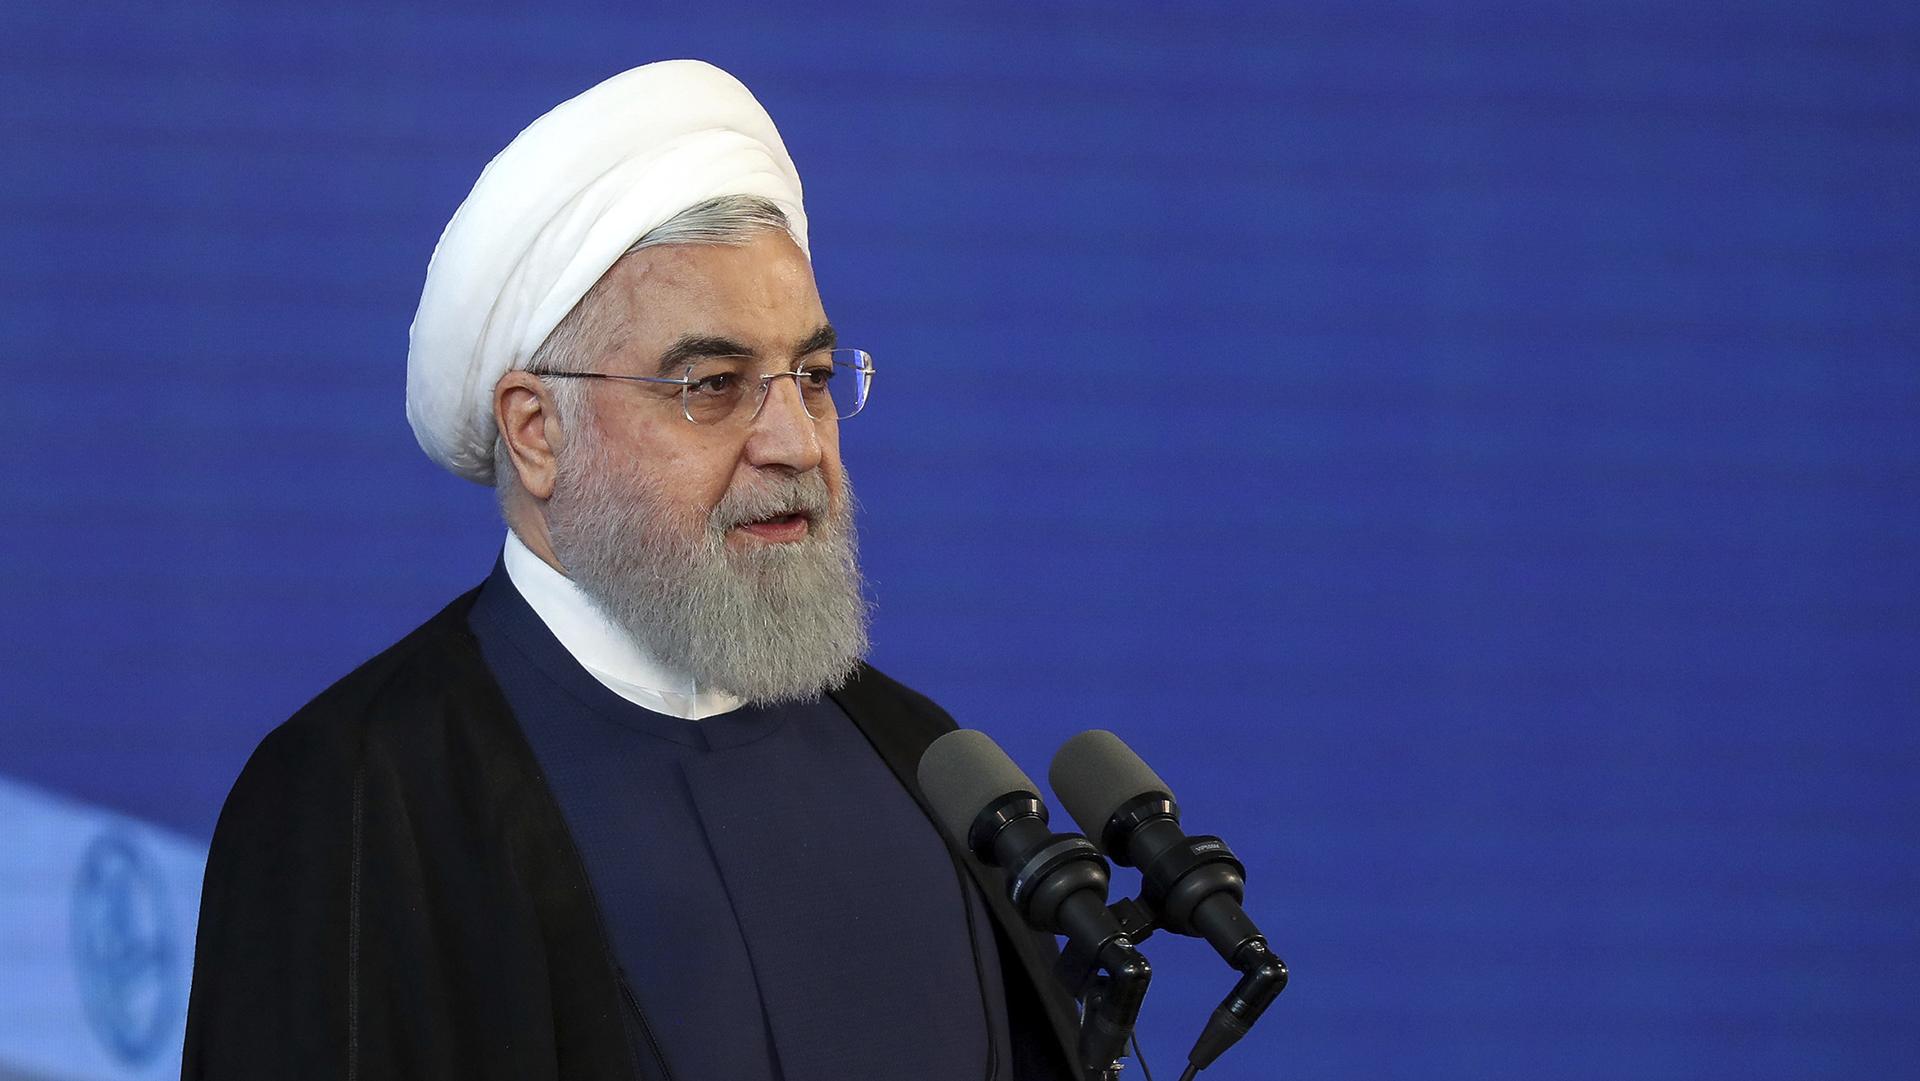 In this photo released by an official website of the office of the Iranian Presidency, Iranian President Hassan Rouhani speaks in a ceremony at Imam Khomeini International Airport some 25 miles south of the capital Tehran, Iran, Tuesday, June 18, 2019. (Iranian Presidency Office via AP)